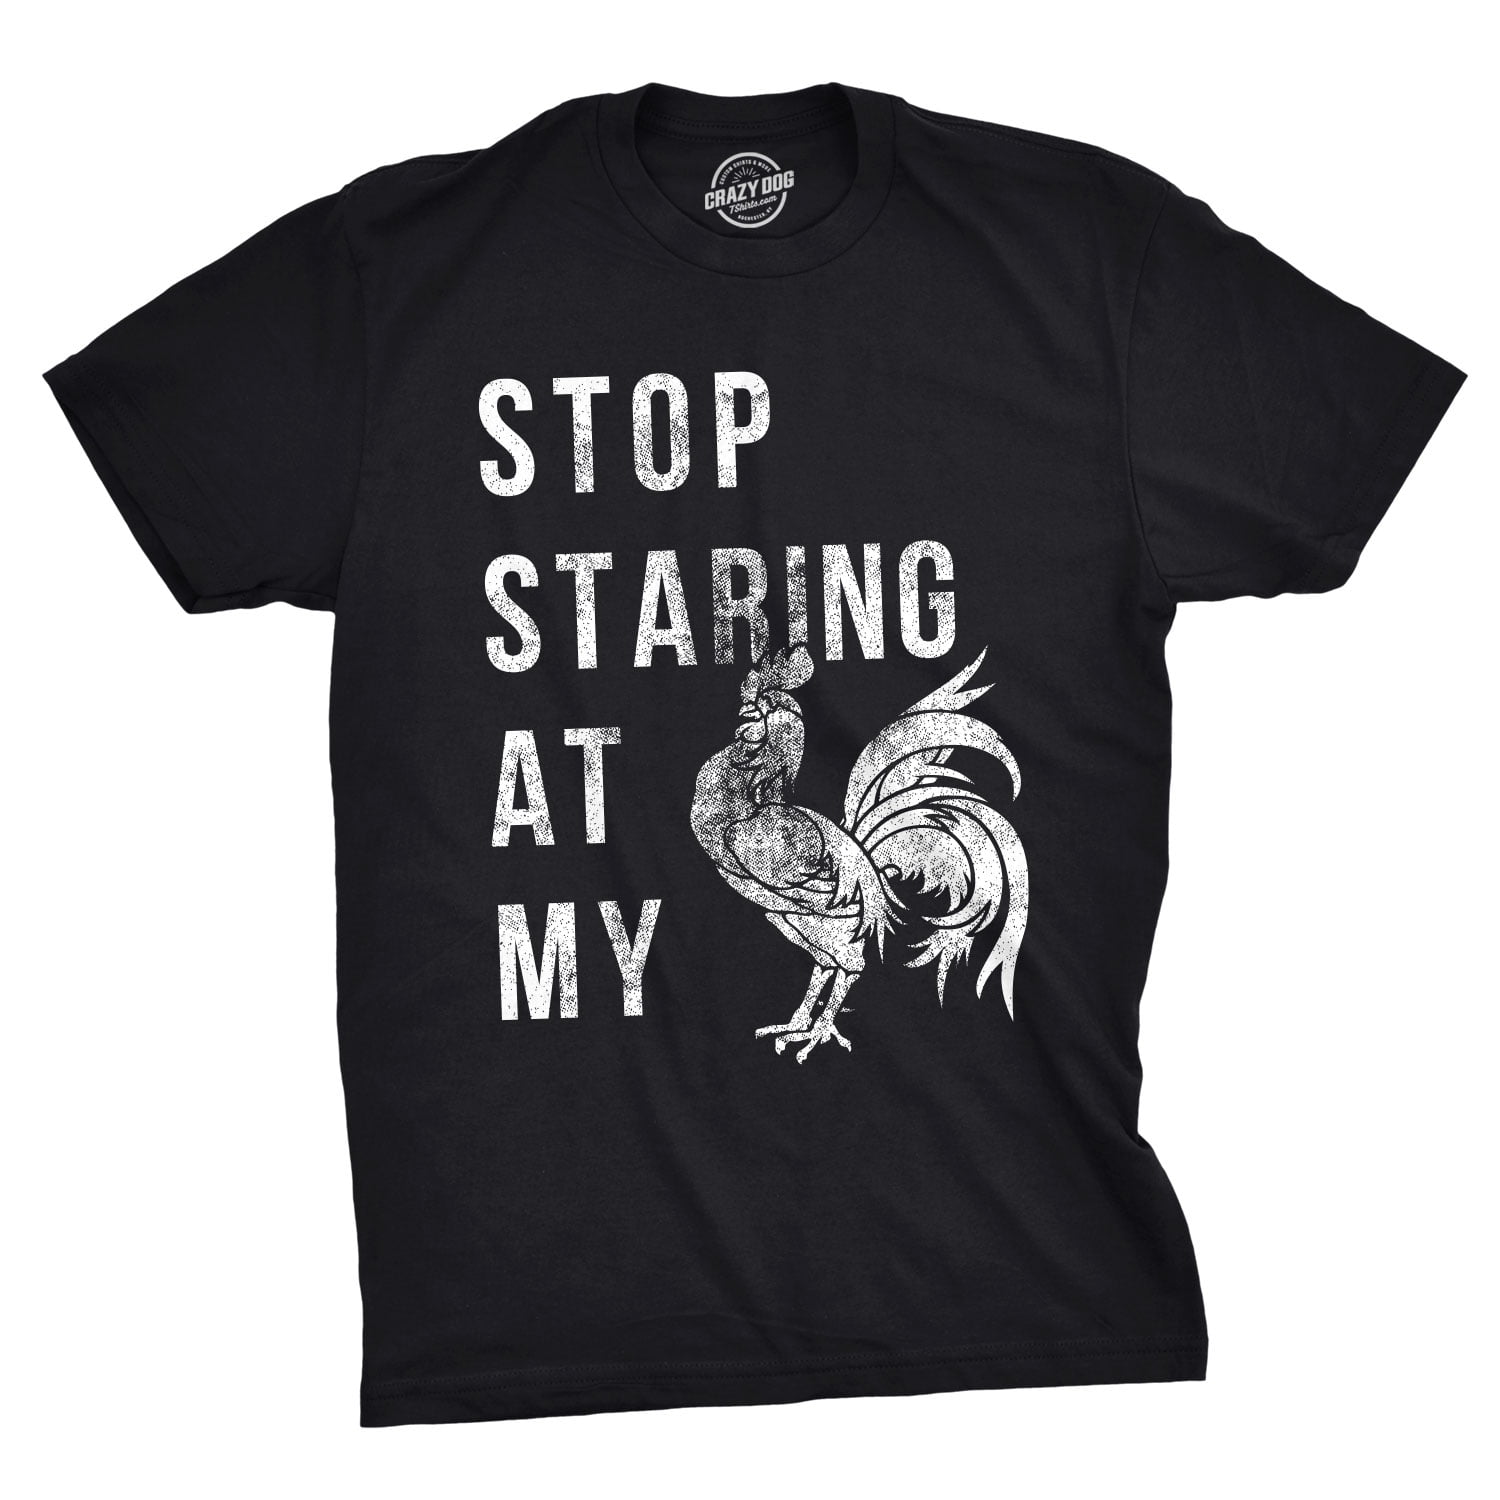 Chicken Graphic Offensive Adult Sarcastic Humor Men's Funny Novelty T-shirts 